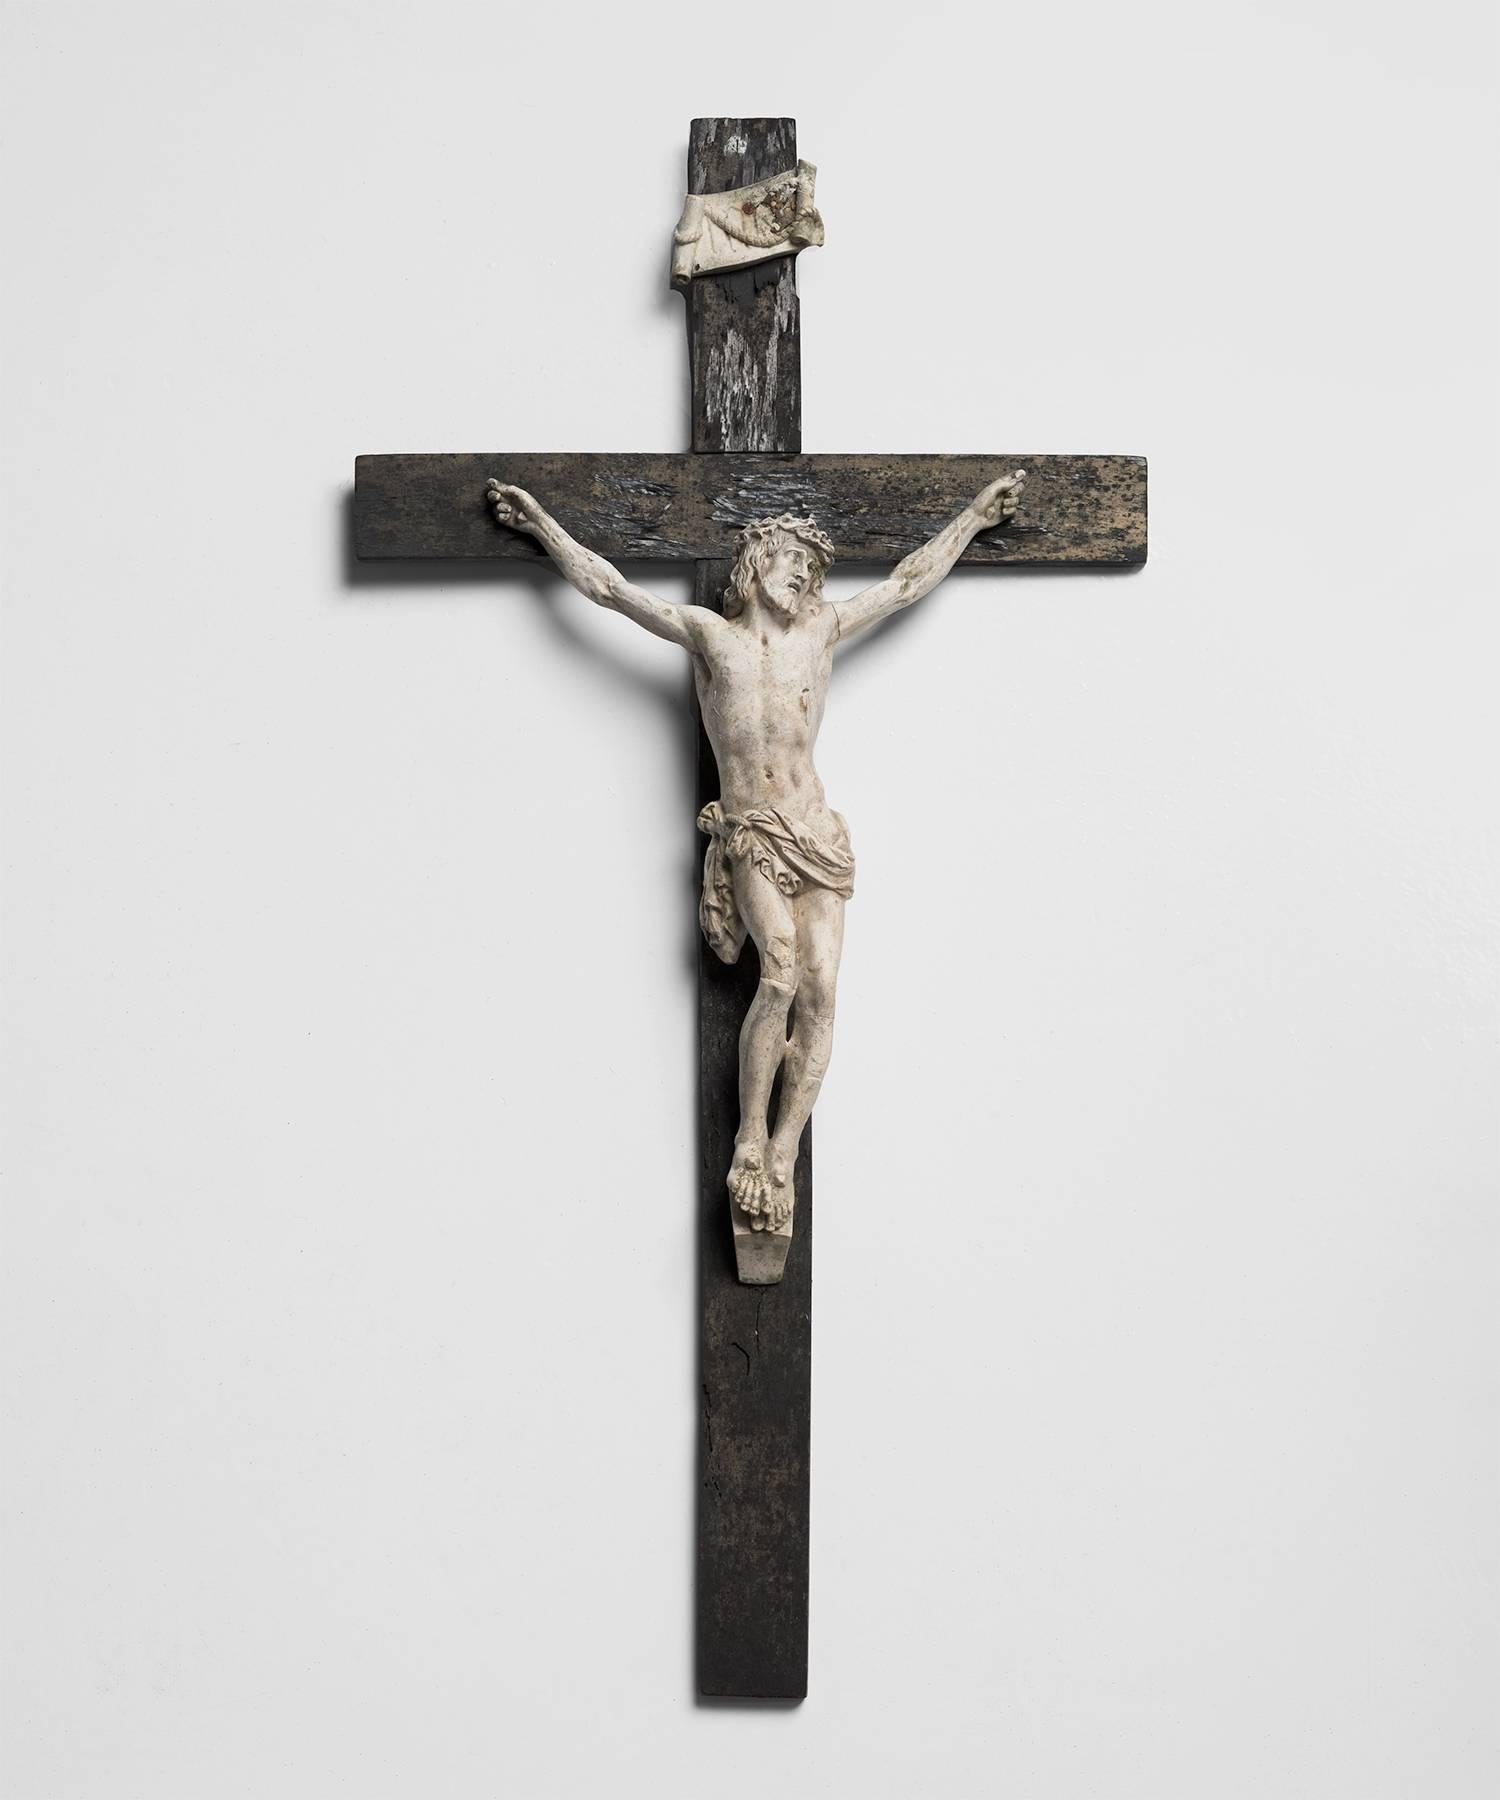 Cast plaster Christ mounted to distressed wood.